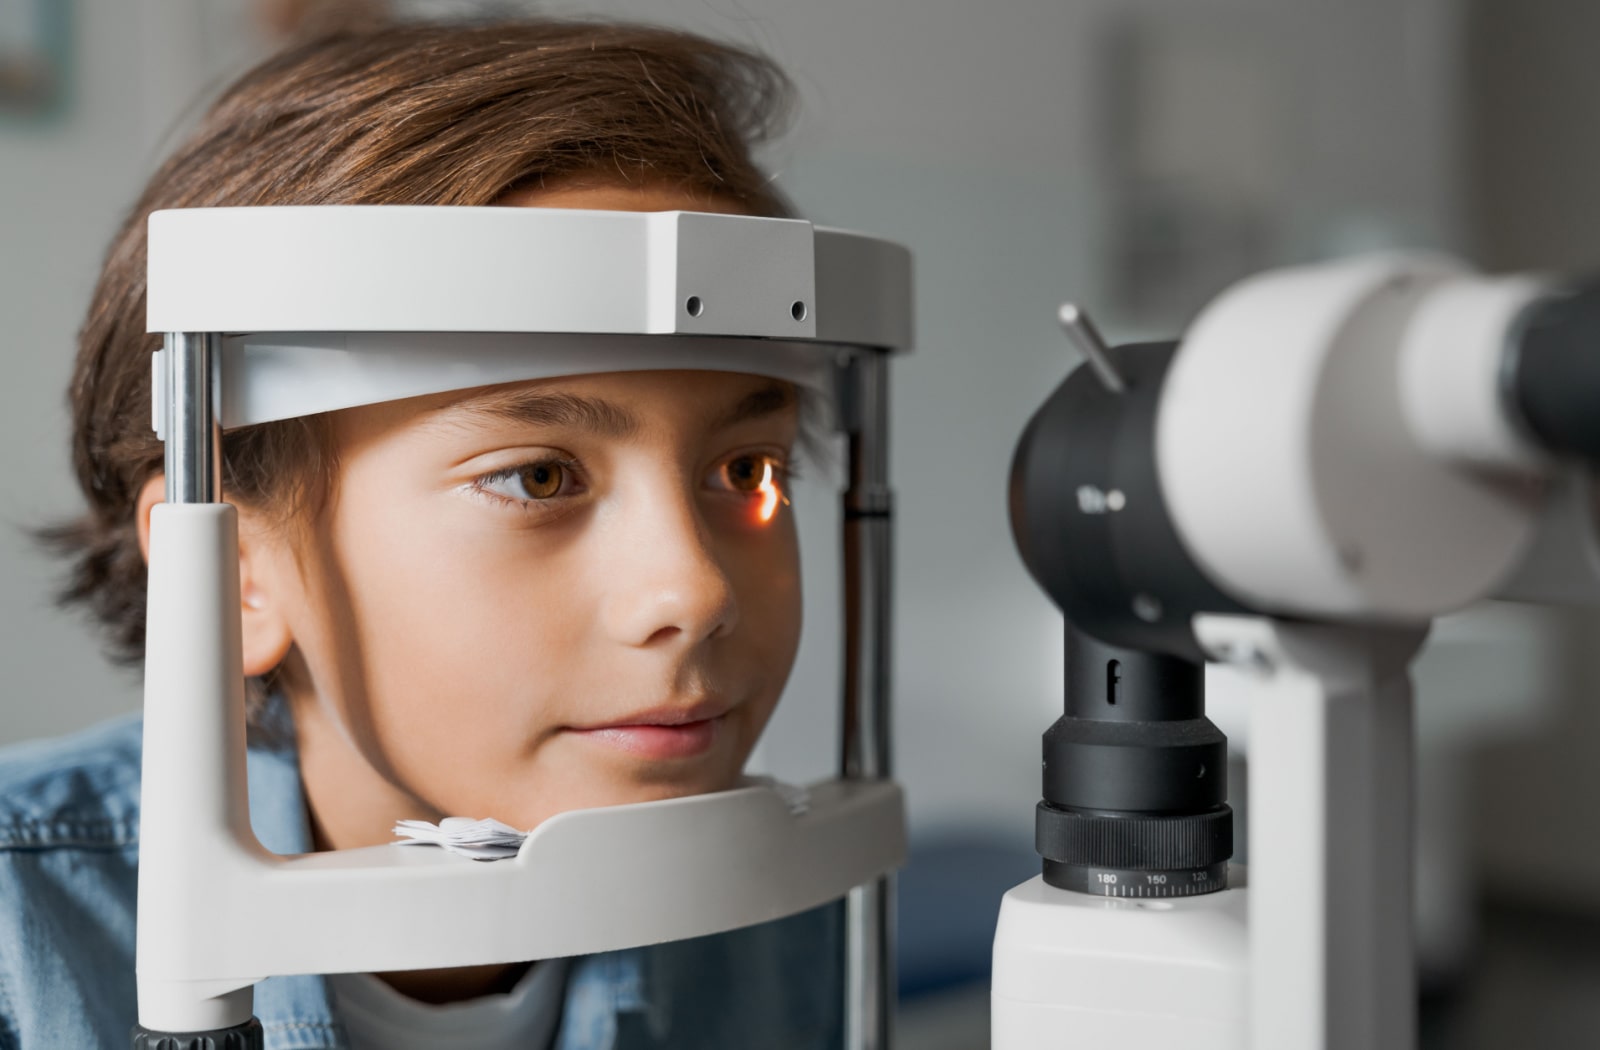 A child undergoing an eye health assessment at his optometrist's office